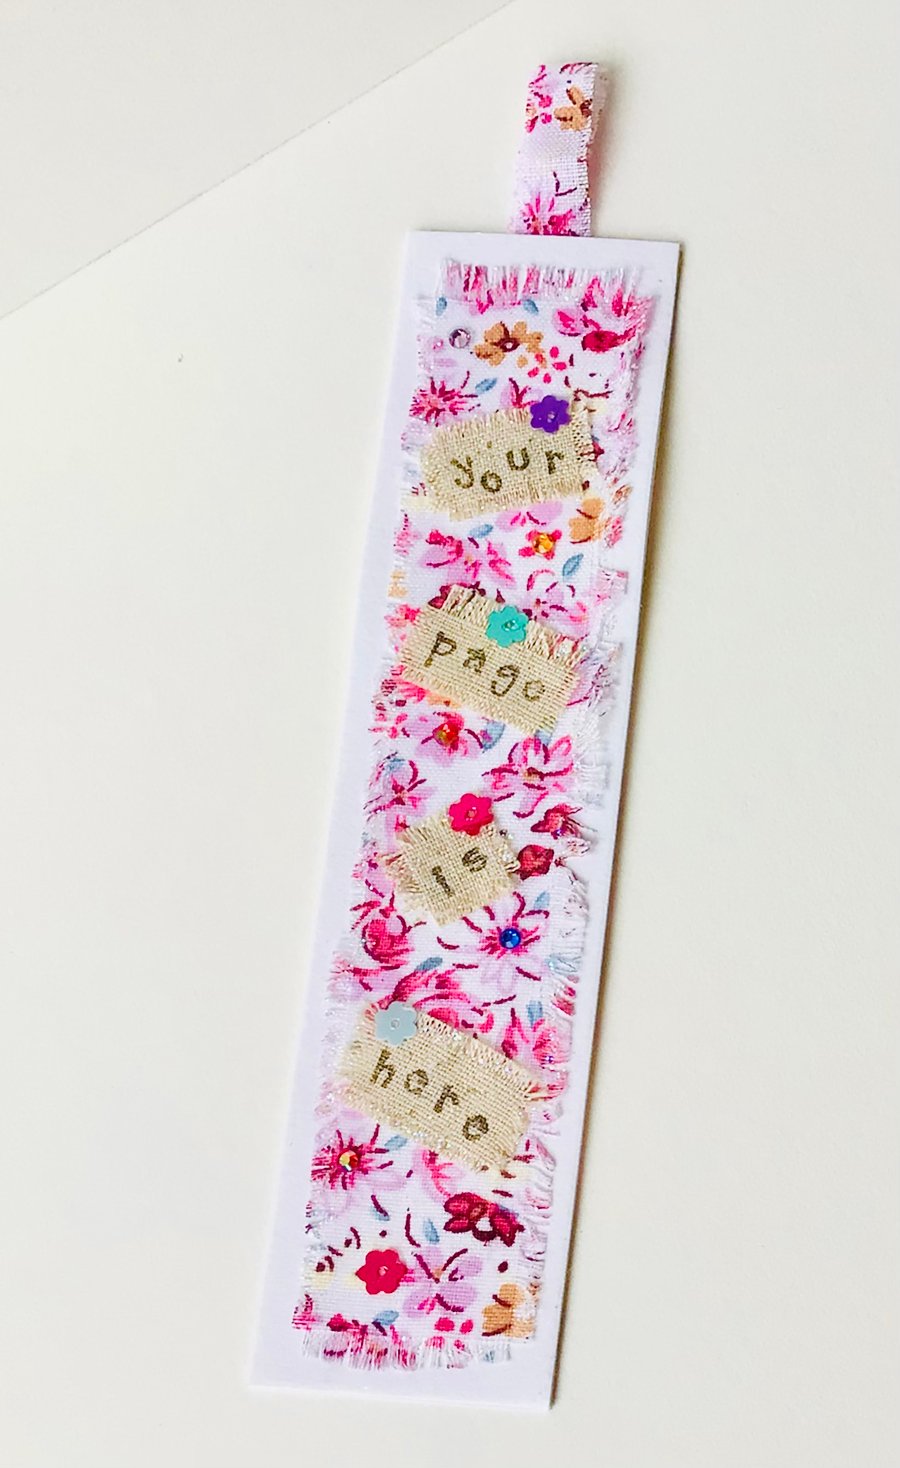 Handmade Bookmark with Fabric Panel and Stamped Message,Decorated